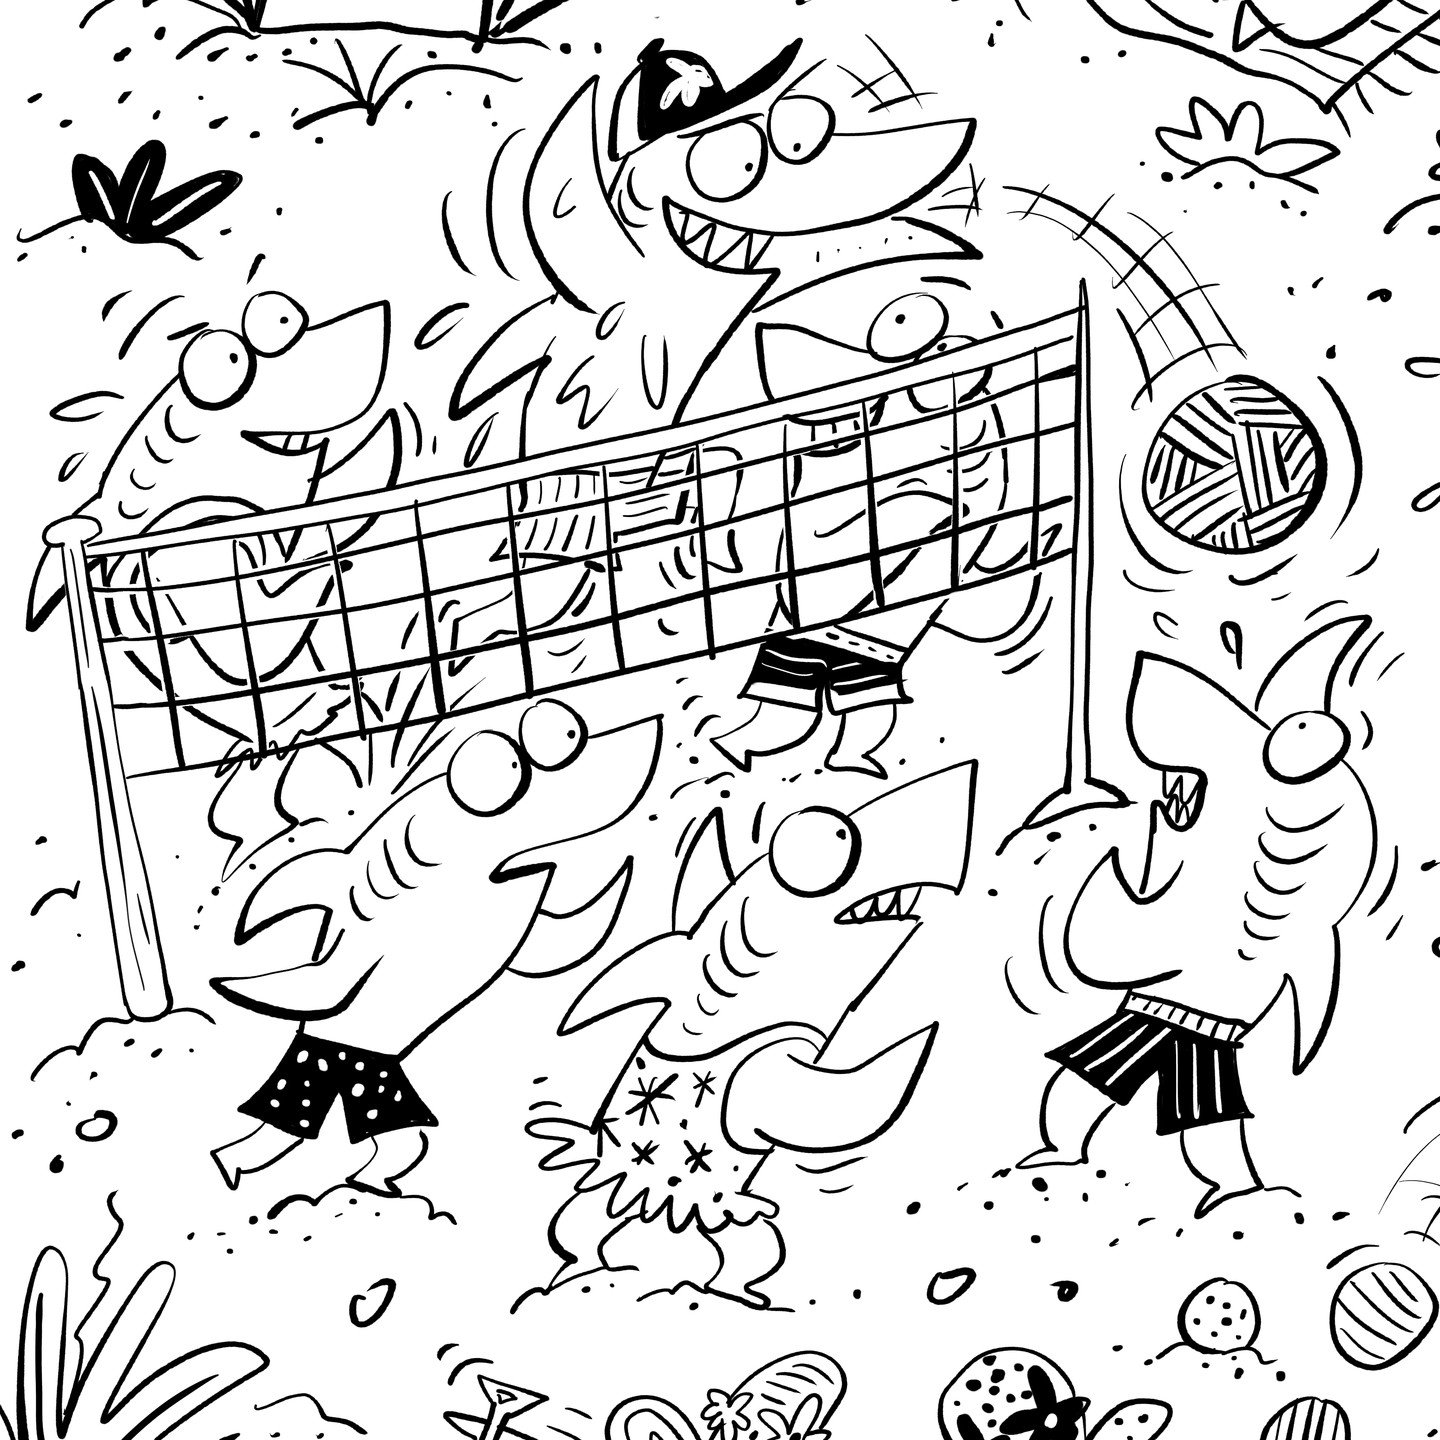 OFF the board now! Meaning, I finished his black and white Hidden Picture (swipe right to see sketch). Can you find any hidden object in this little smidgen of the whole scene? editorial nixed any characters with buck teeth, btw. I'm not sure why...?